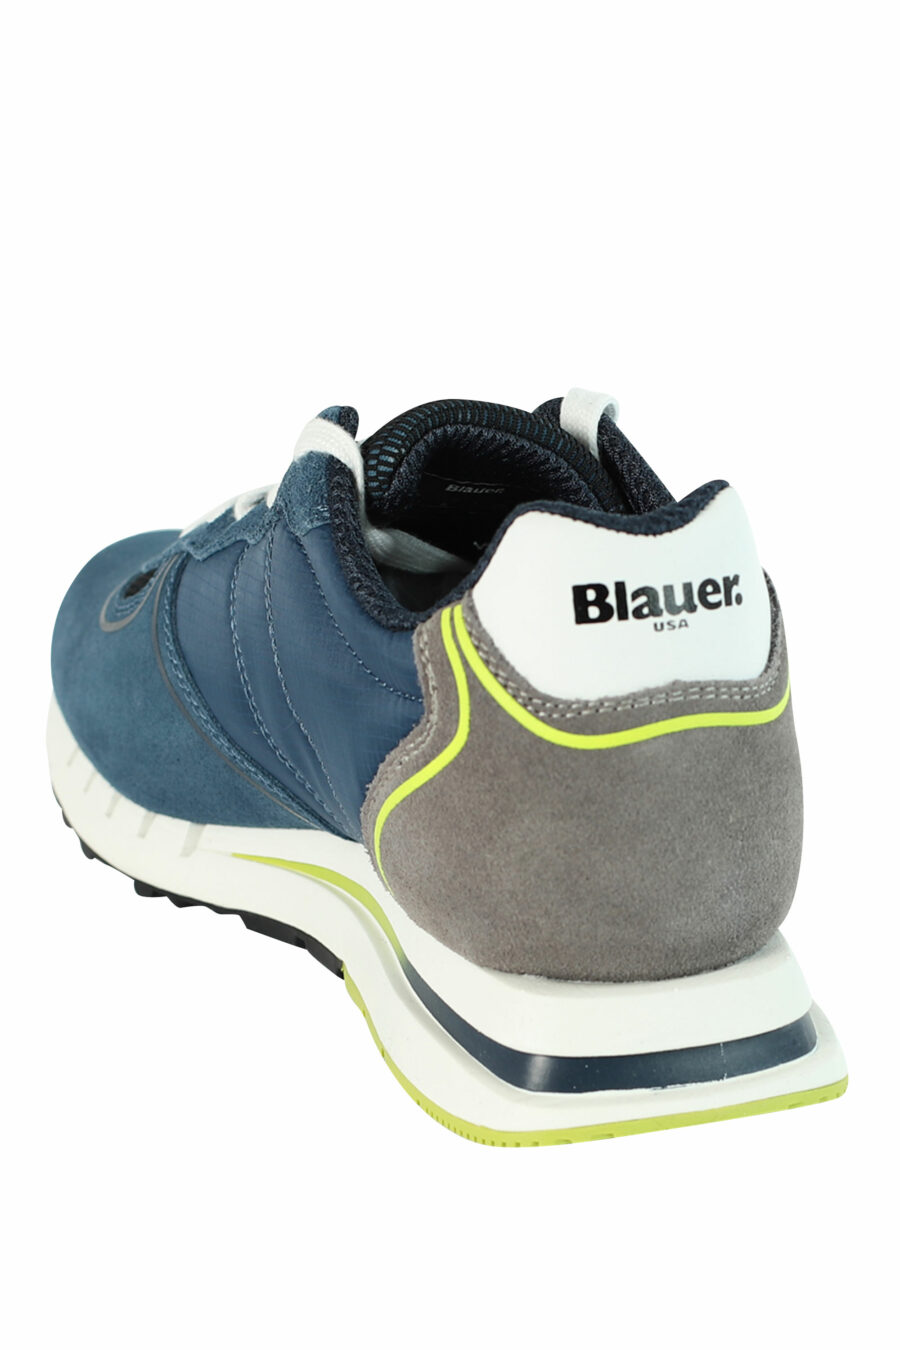 Trainers "QUARTZ" blue with grey and yellow details - 8058156499119 4